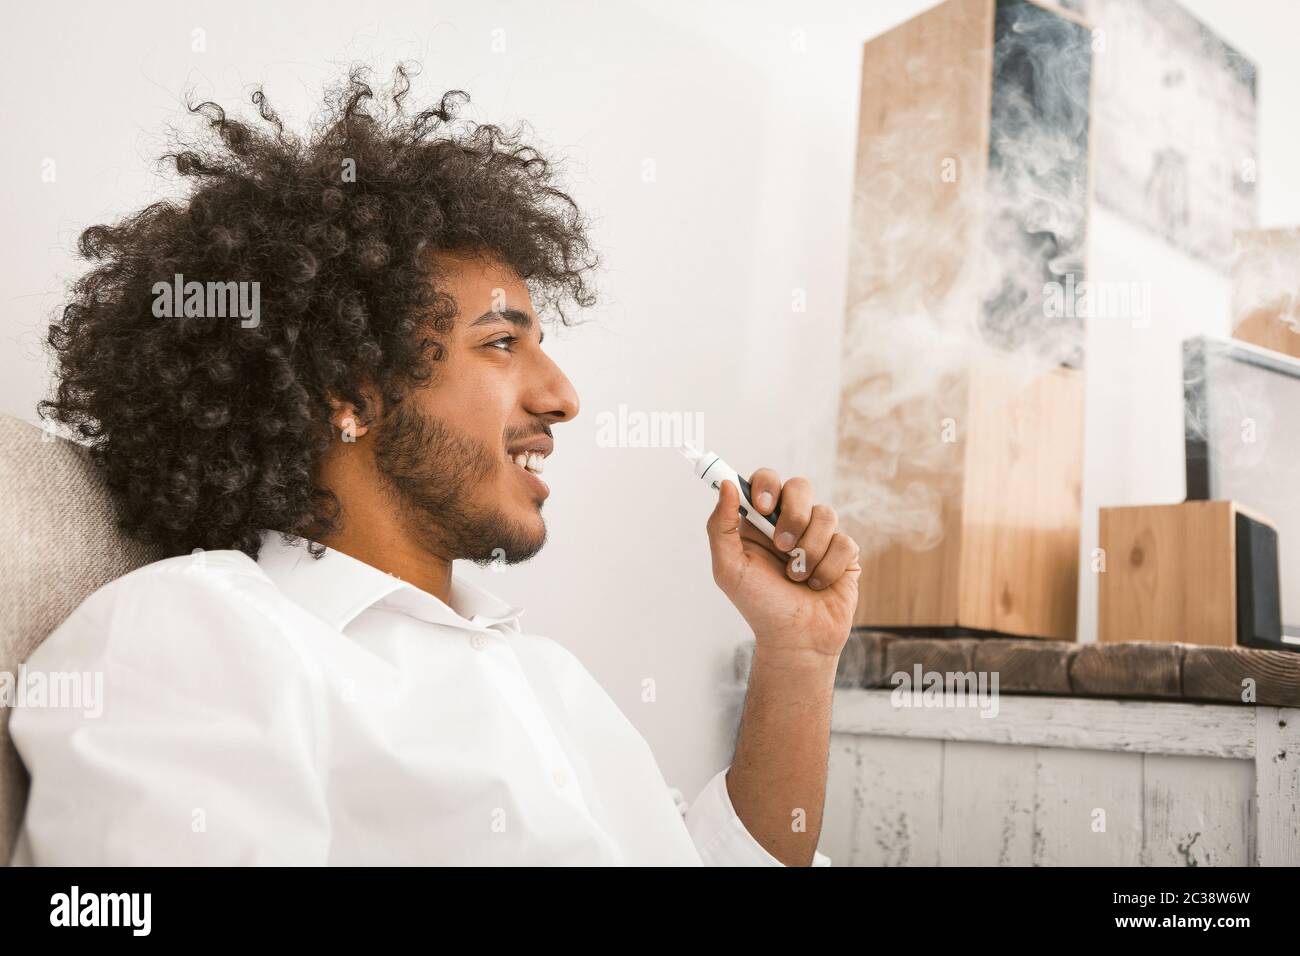 Shaggy man rests smoking e-cigarette. Smiling sun-tanned guy admires looking at smoke clouds. Alternative smoking concept. Side view. Close up shot Stock Photo